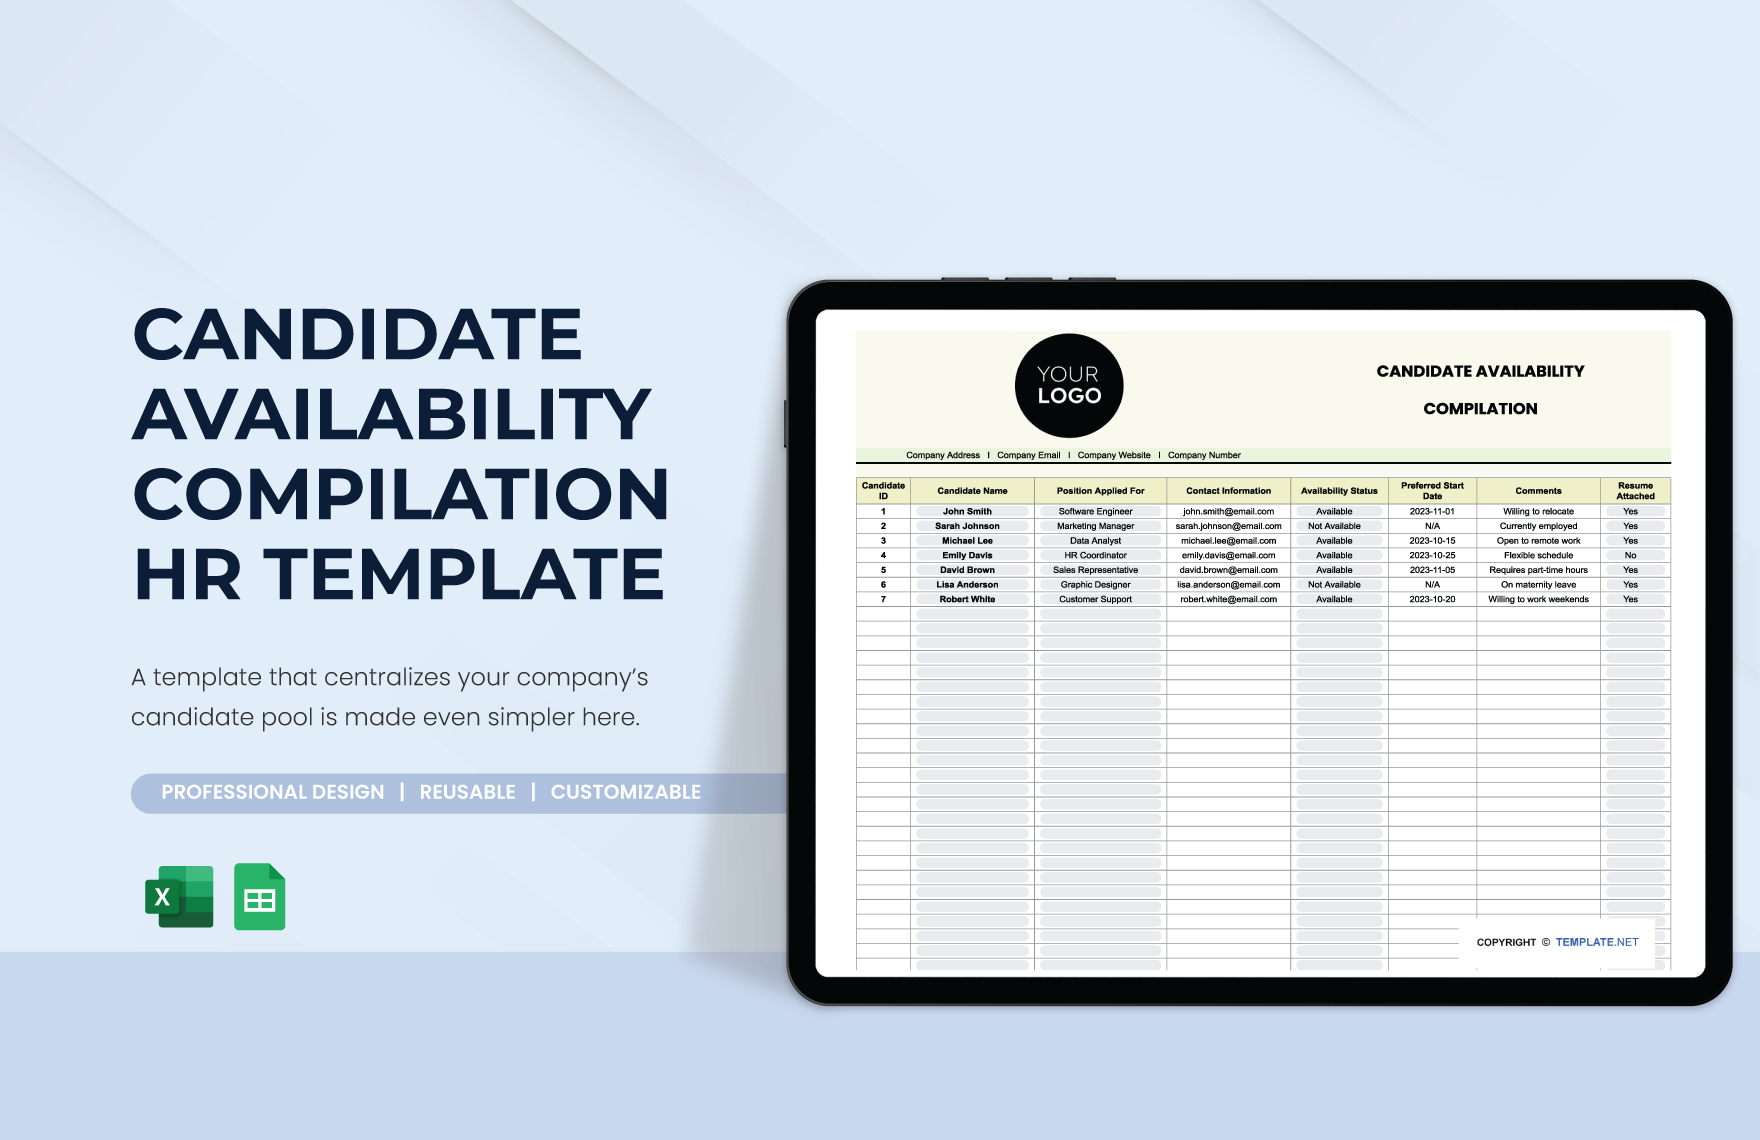 Candidate Availability Compilation HR Template